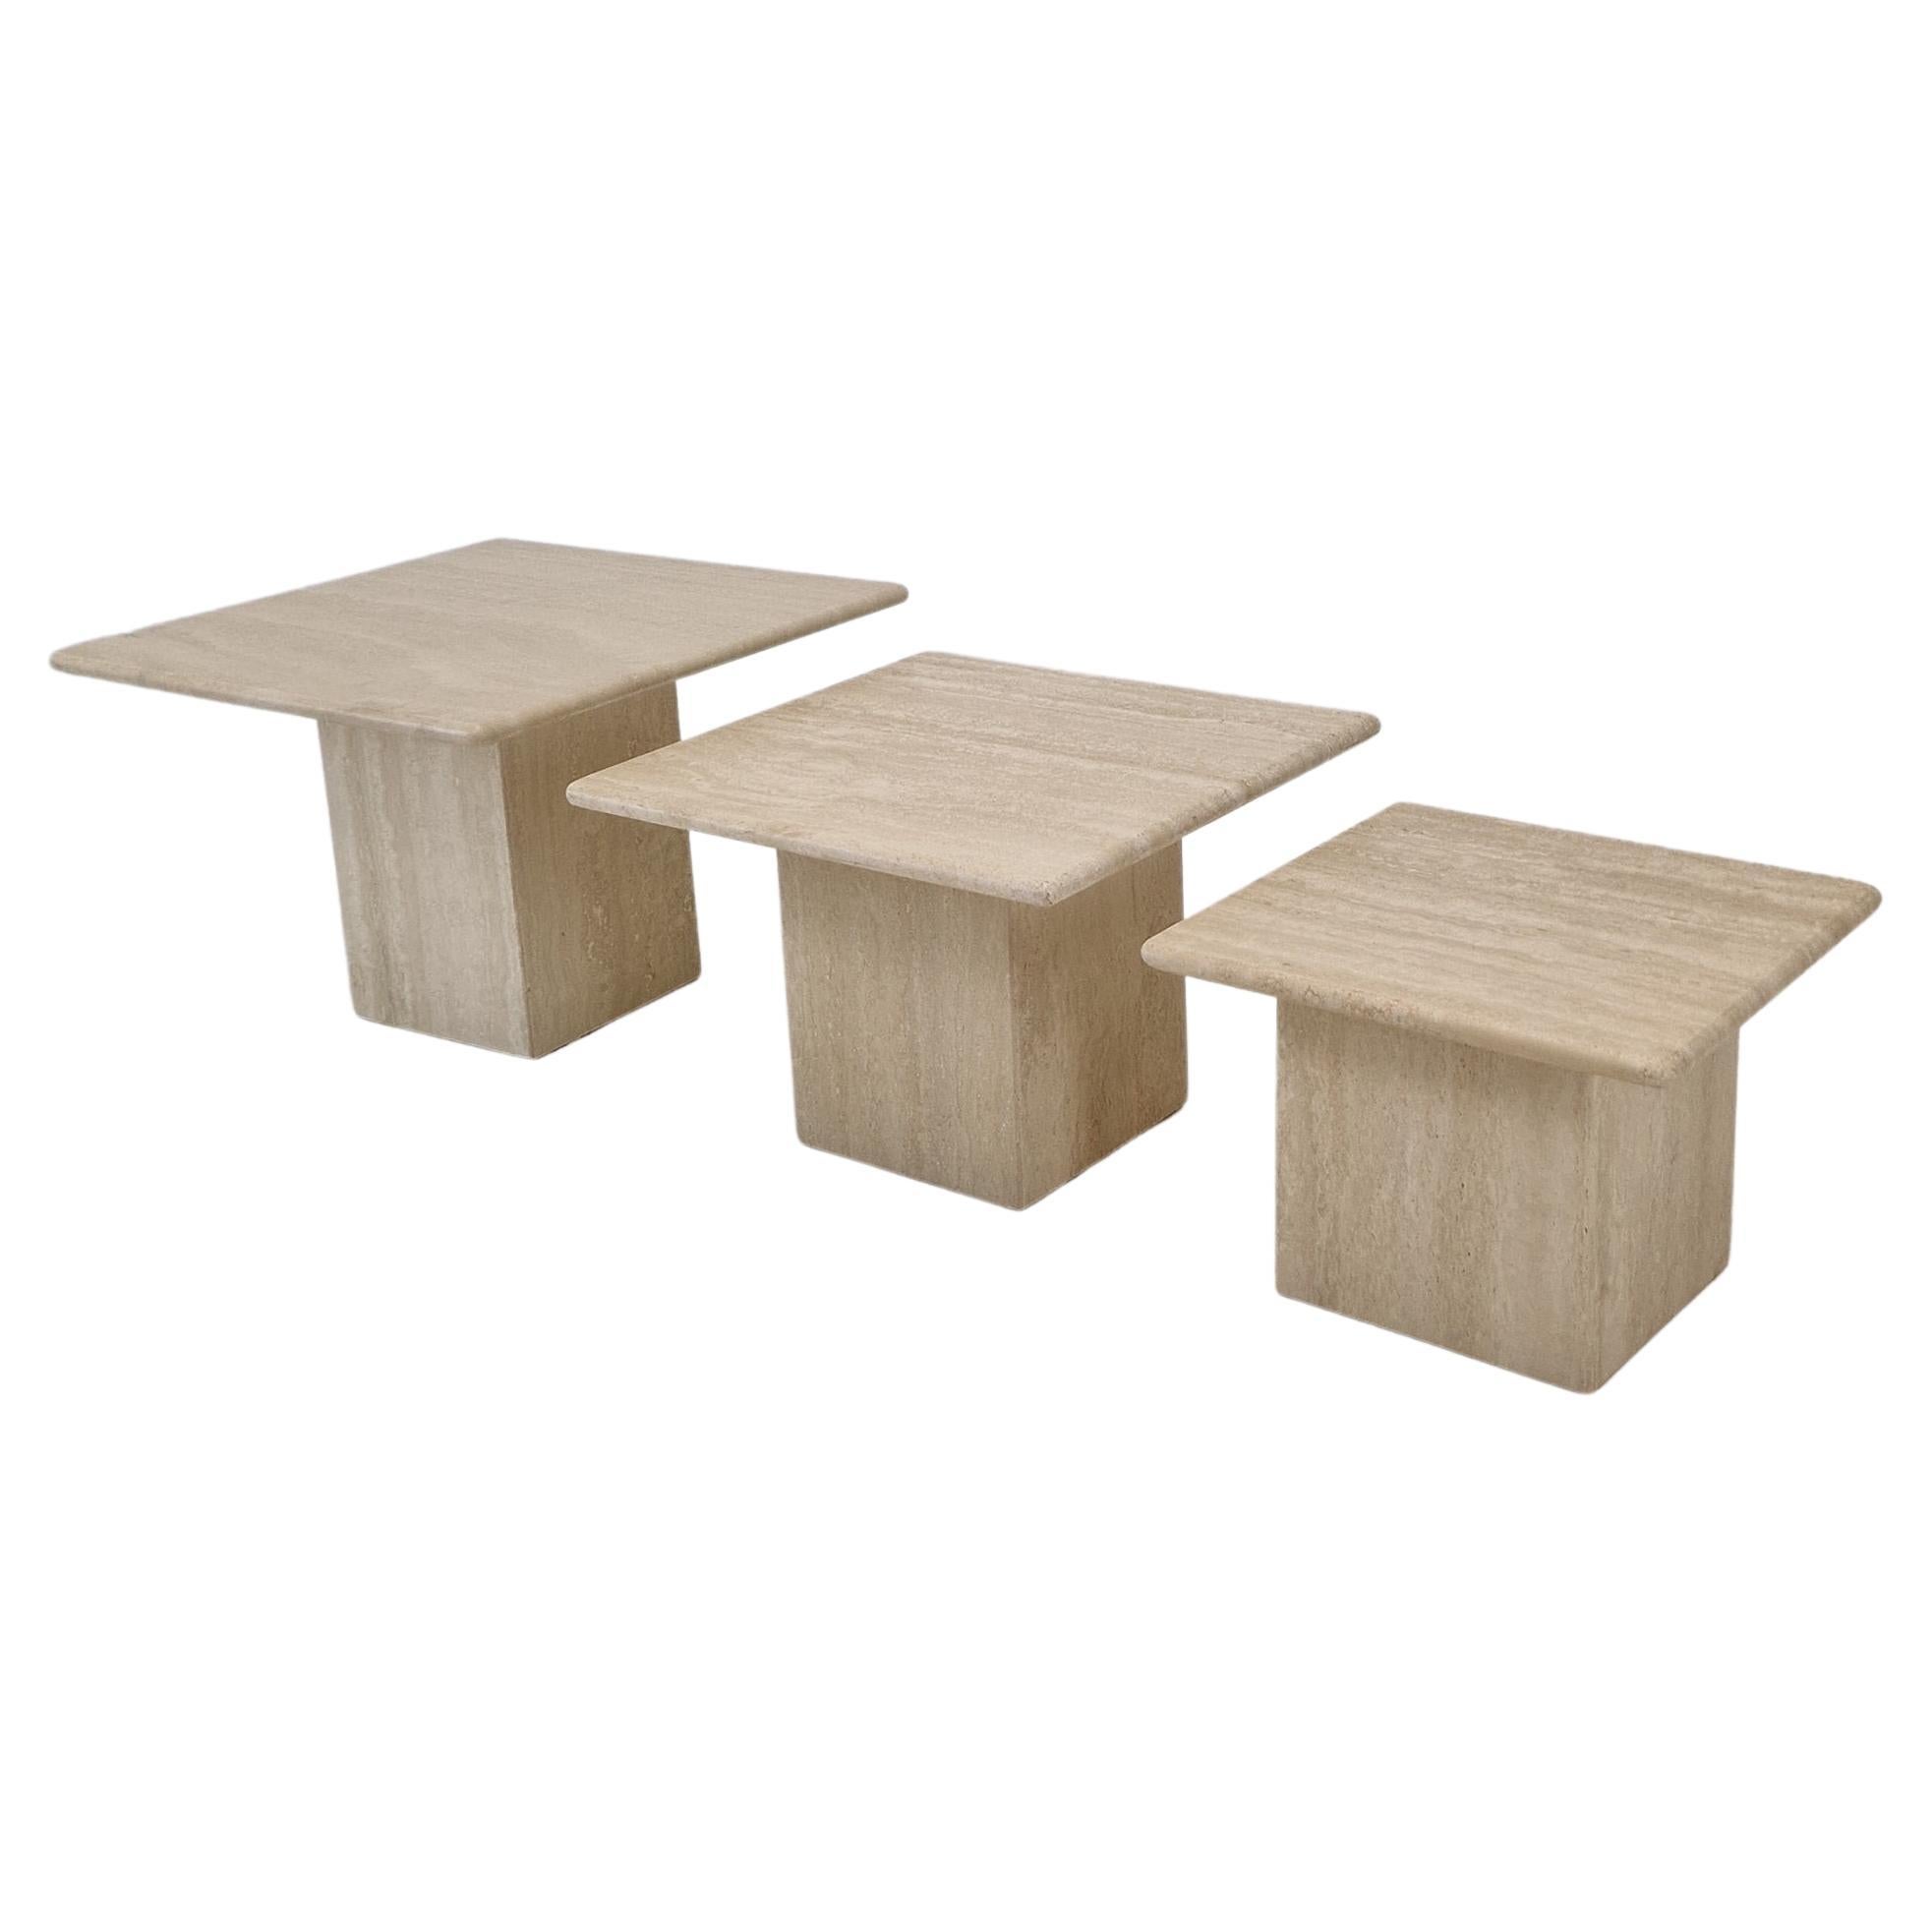 Set of 3 Italian Travertine Coffee or Side Tables, 1980s For Sale